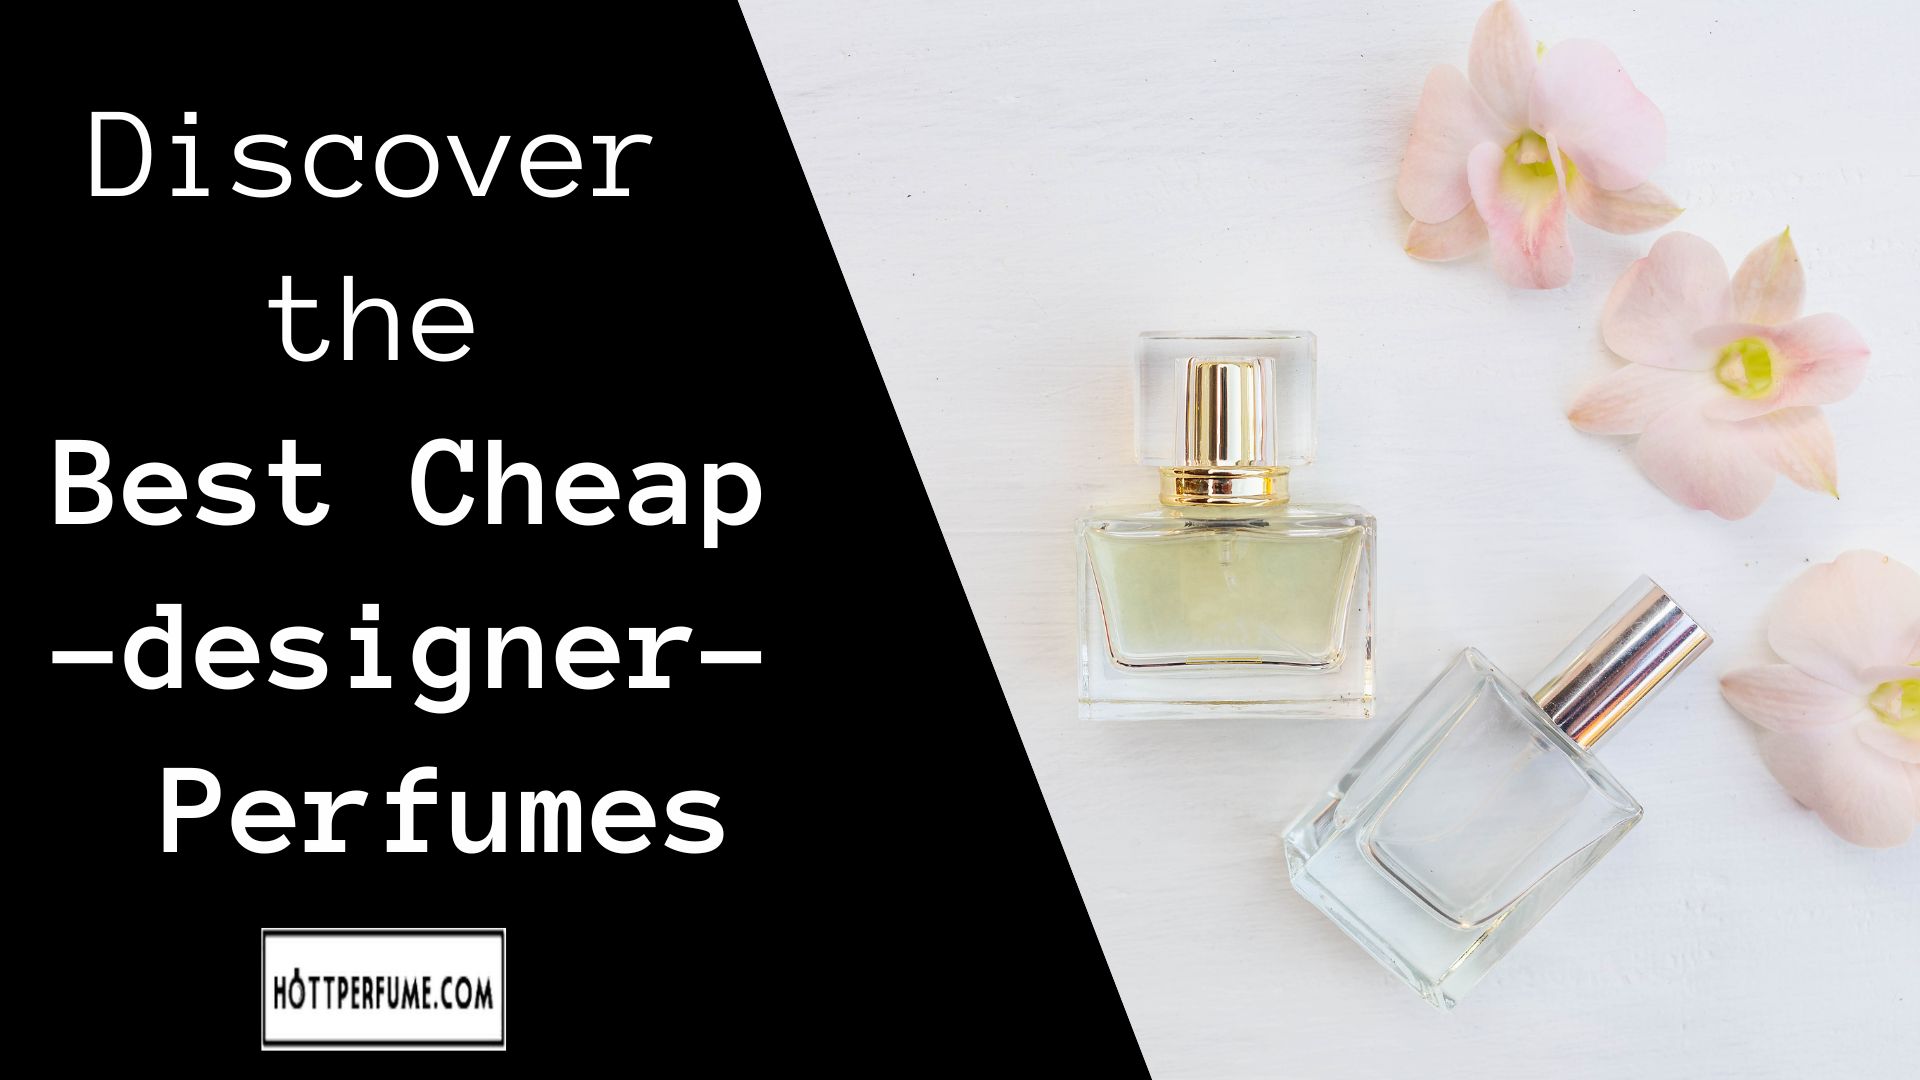 Discover the Best Cheap Perfumes - HottPerfume.com